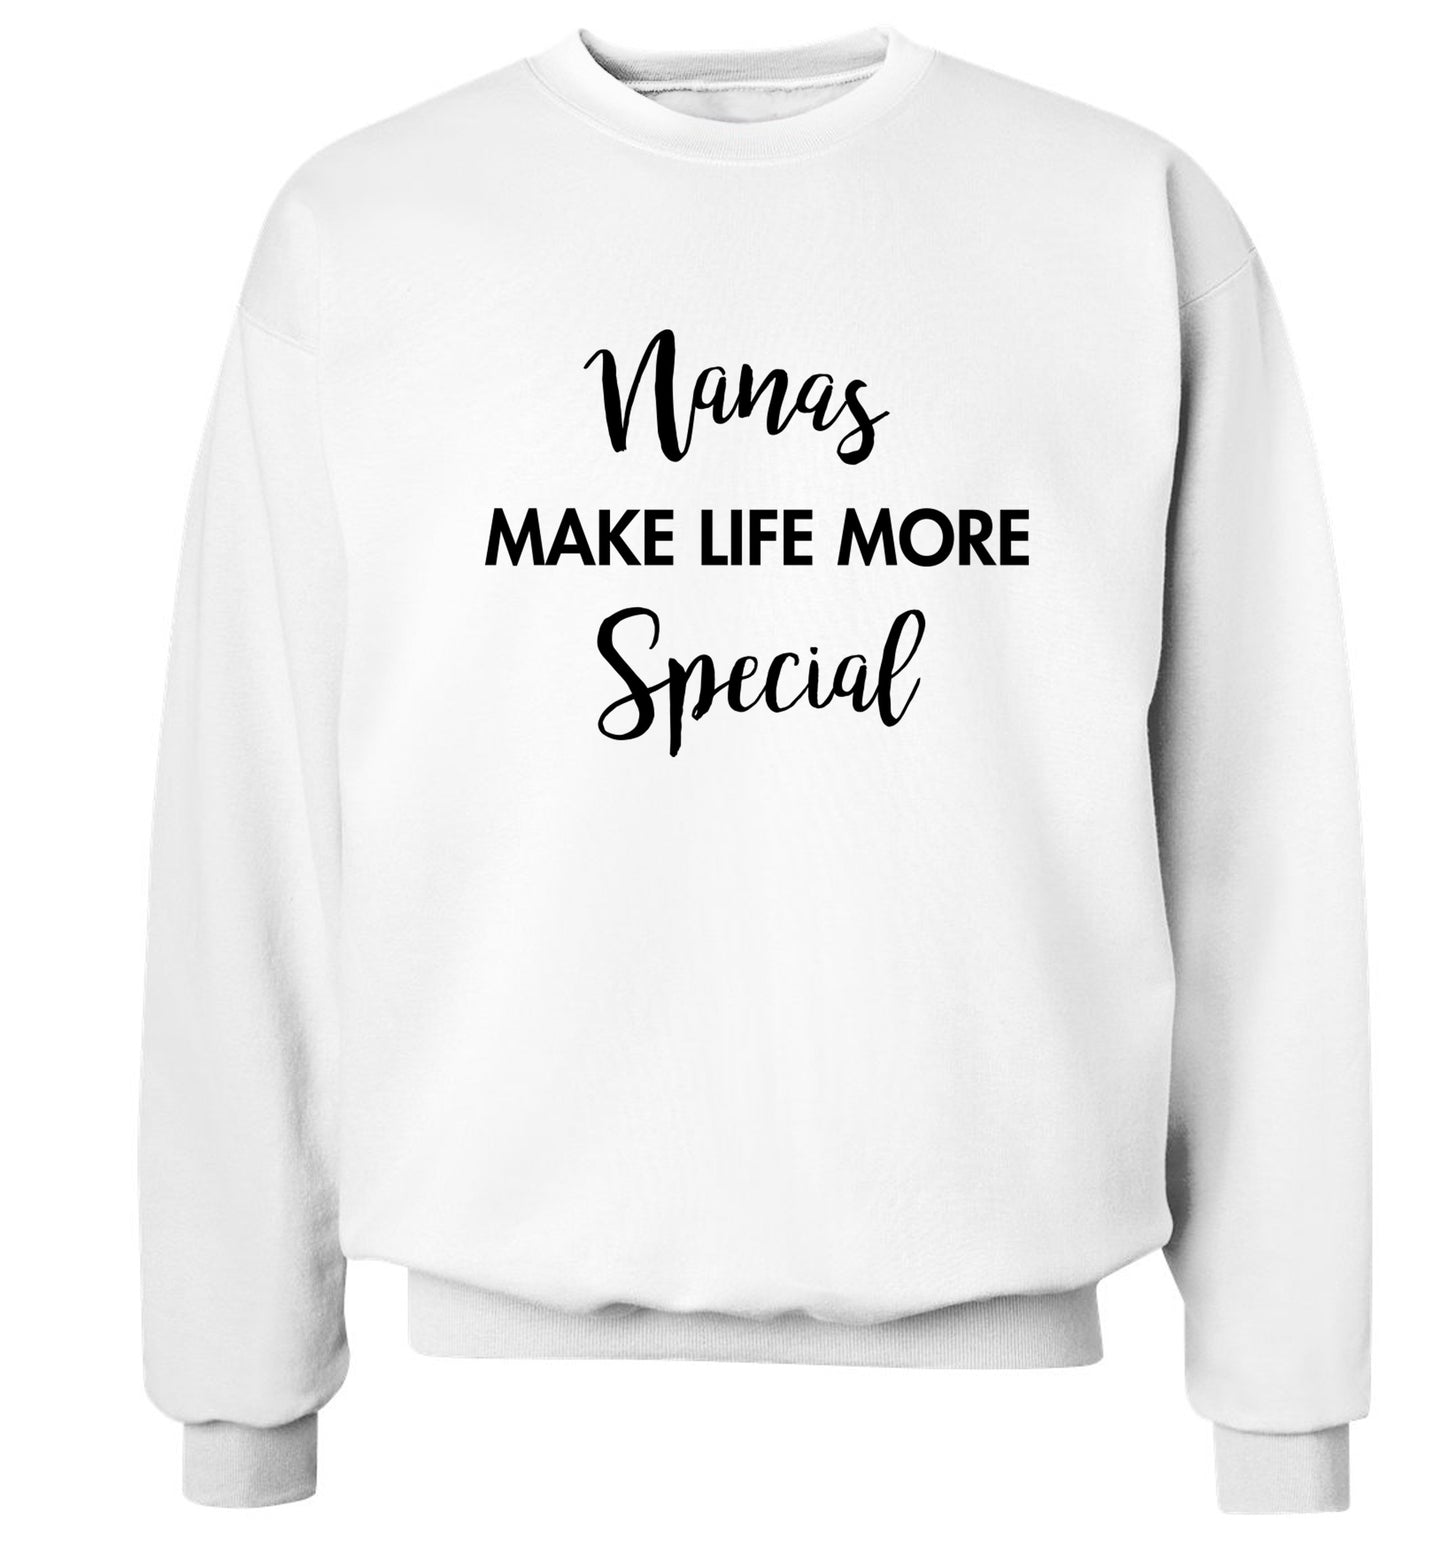 Nanas make life more special Adult's unisex white Sweater 2XL